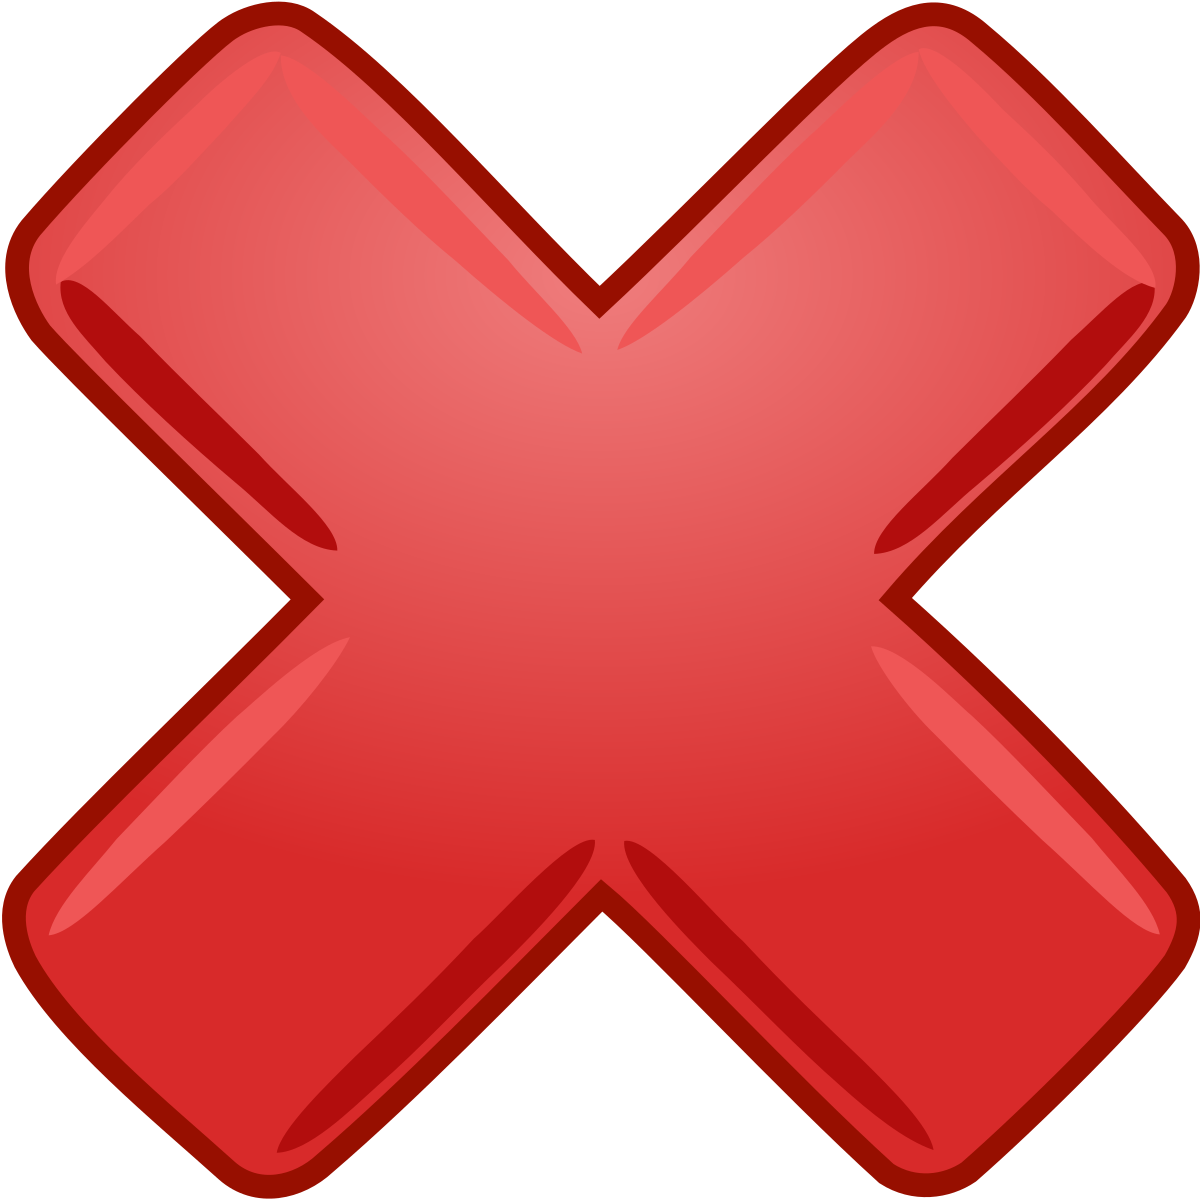 File:Cancelled cross.svg - Wikimedia Commons.